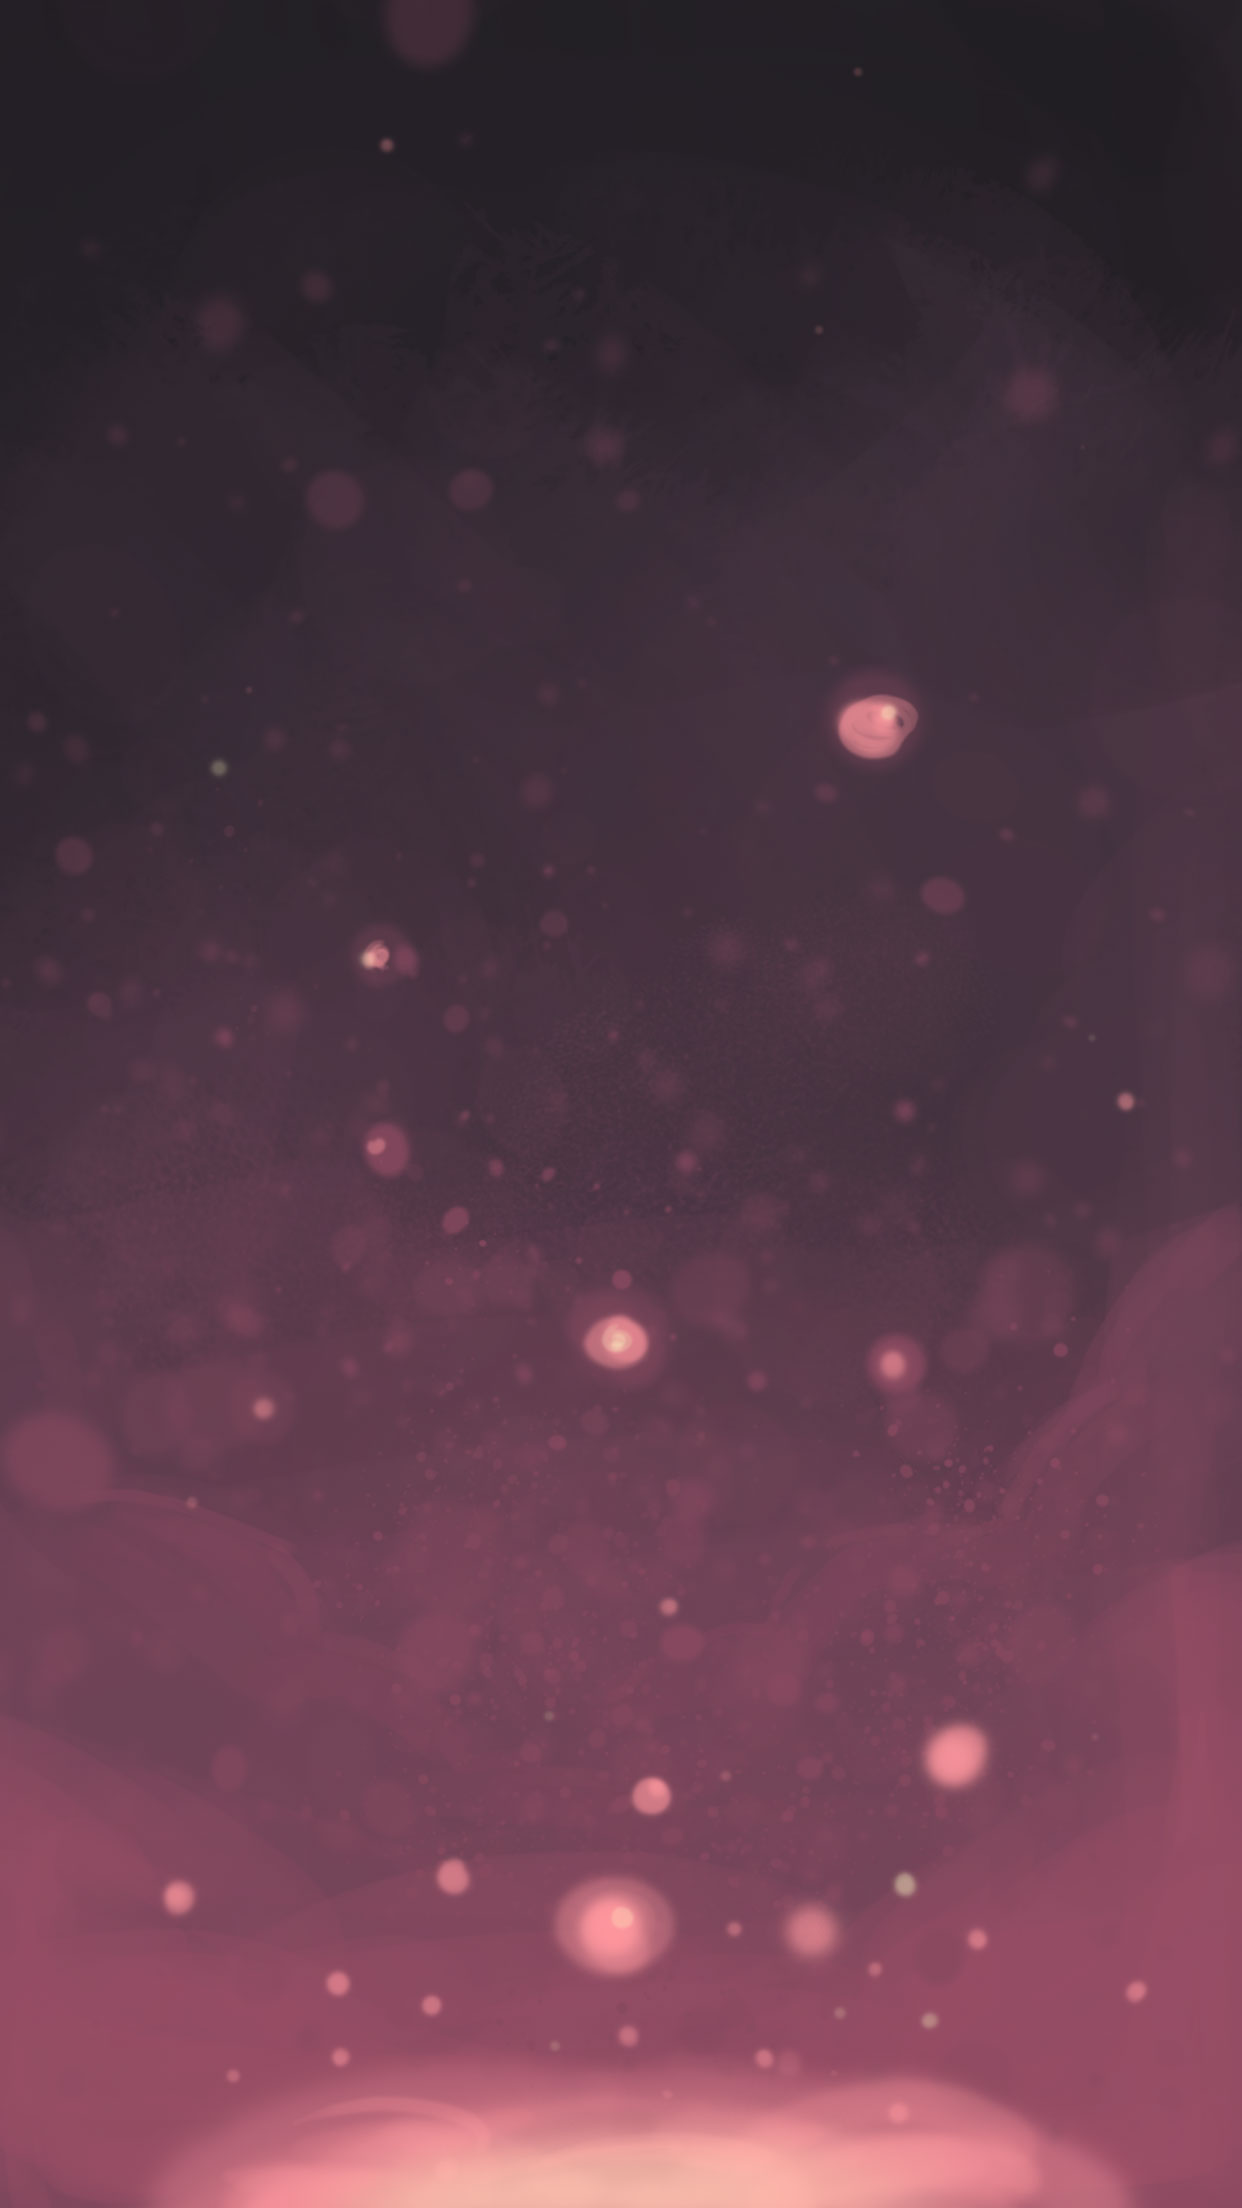 A simple digital painting of a dark purple sky with pink fire embers floating up